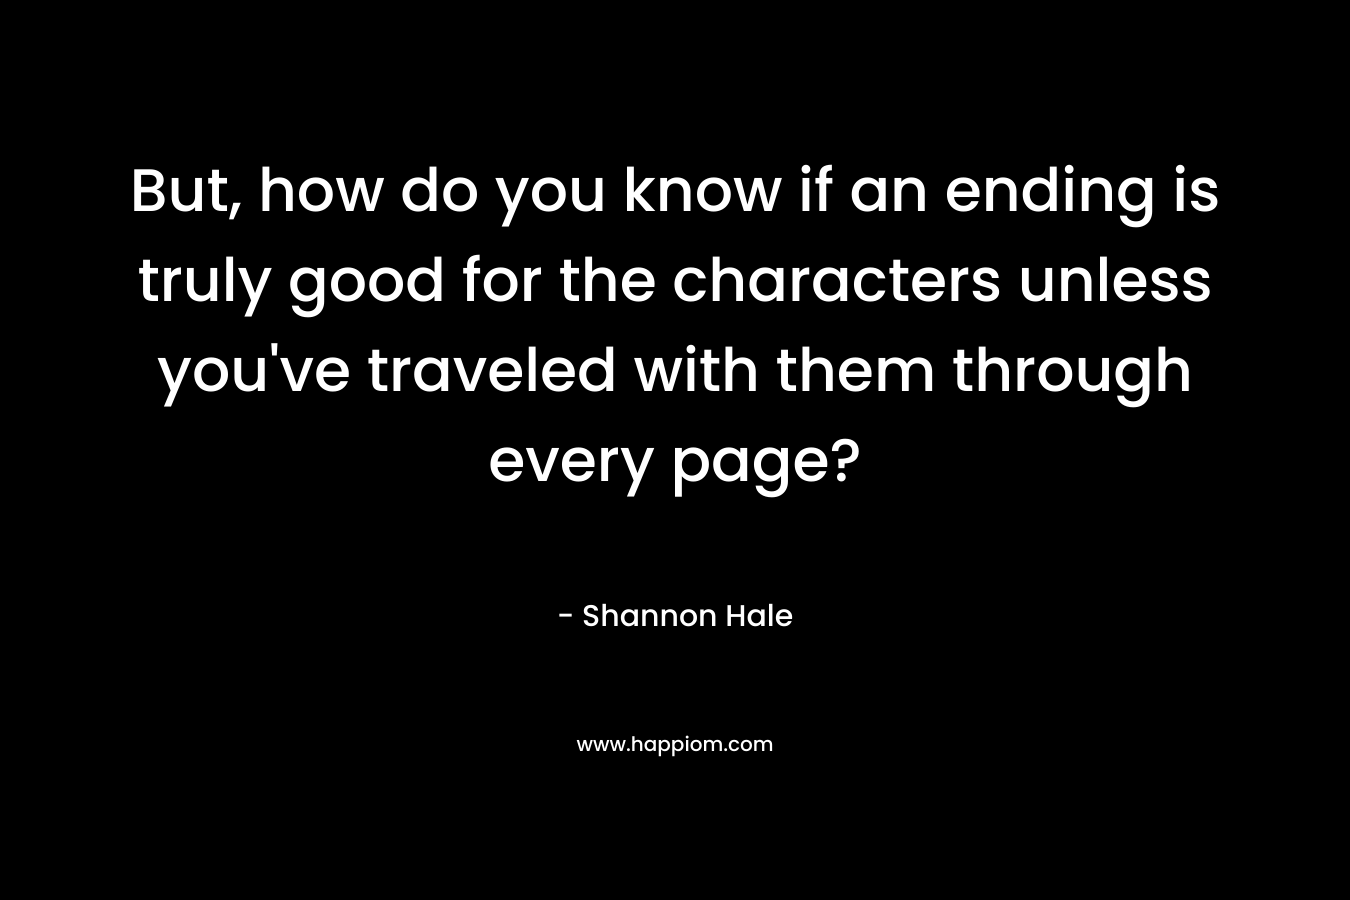 But, how do you know if an ending is truly good for the characters unless you’ve traveled with them through every page? – Shannon Hale